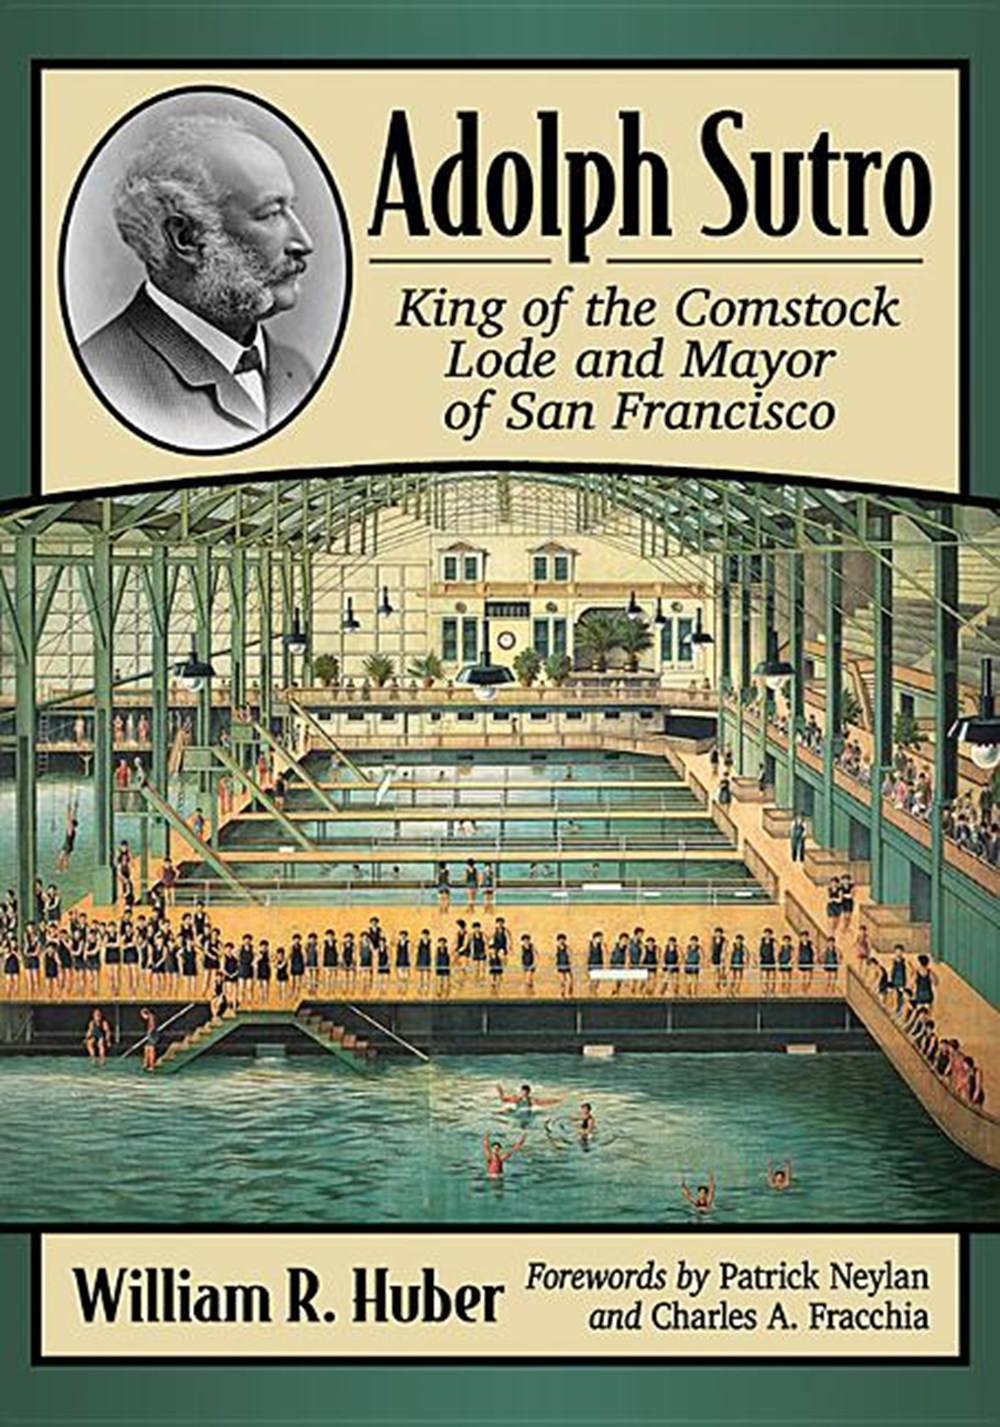 Adolph Sutro: King of the Comstock Lode and Mayor of San Francisco